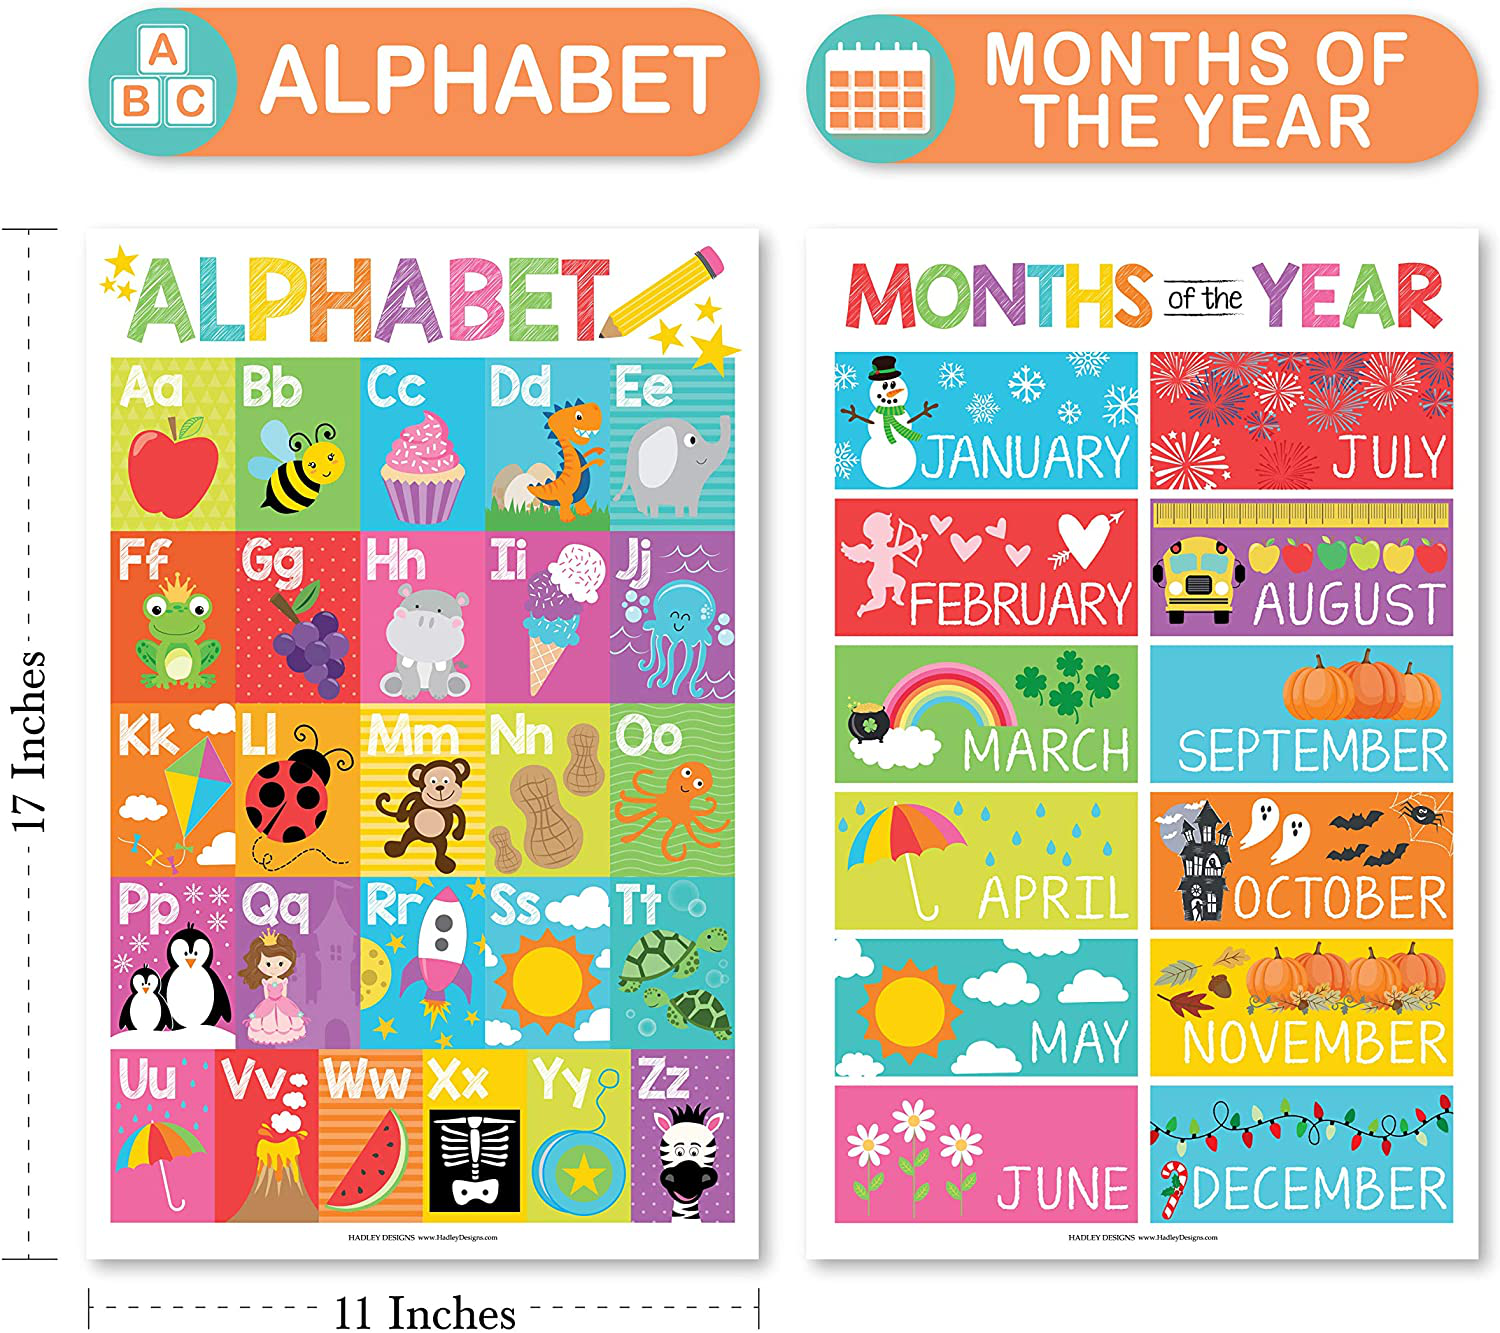 4 Alphabet, Months of the Year, Weather, Days of The Week Calendar For Kids, ABC Posters For Toddlers Wall Decor Art, Charts for Kindergarten Classroom PreK or Homeschool, Educational Laminated 11x17"